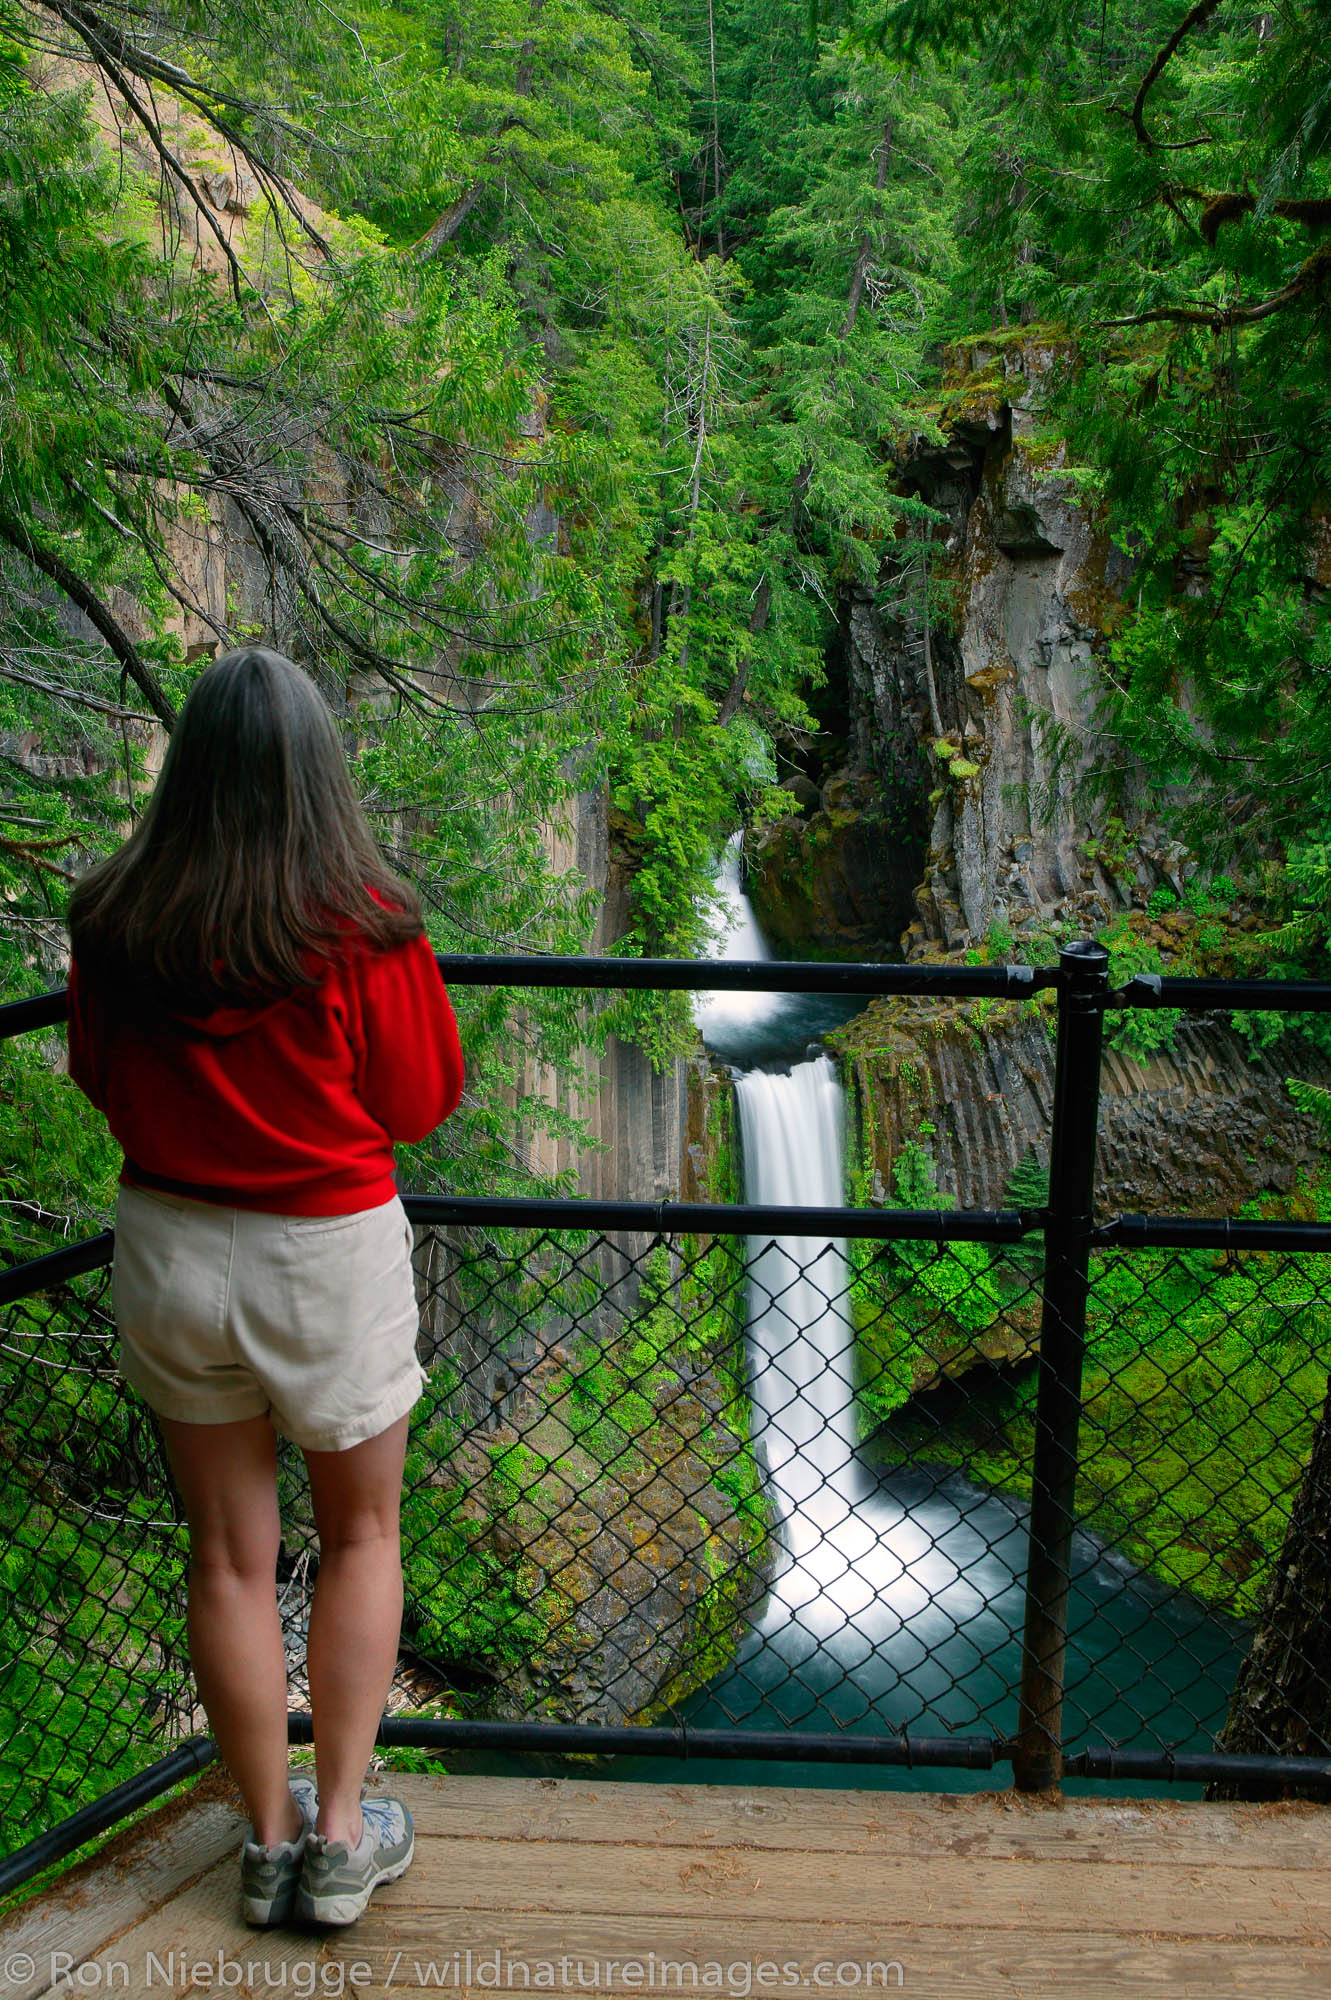 A visitor (MR) views the Toketee Falls in the Umpqua National Forest, Oregon